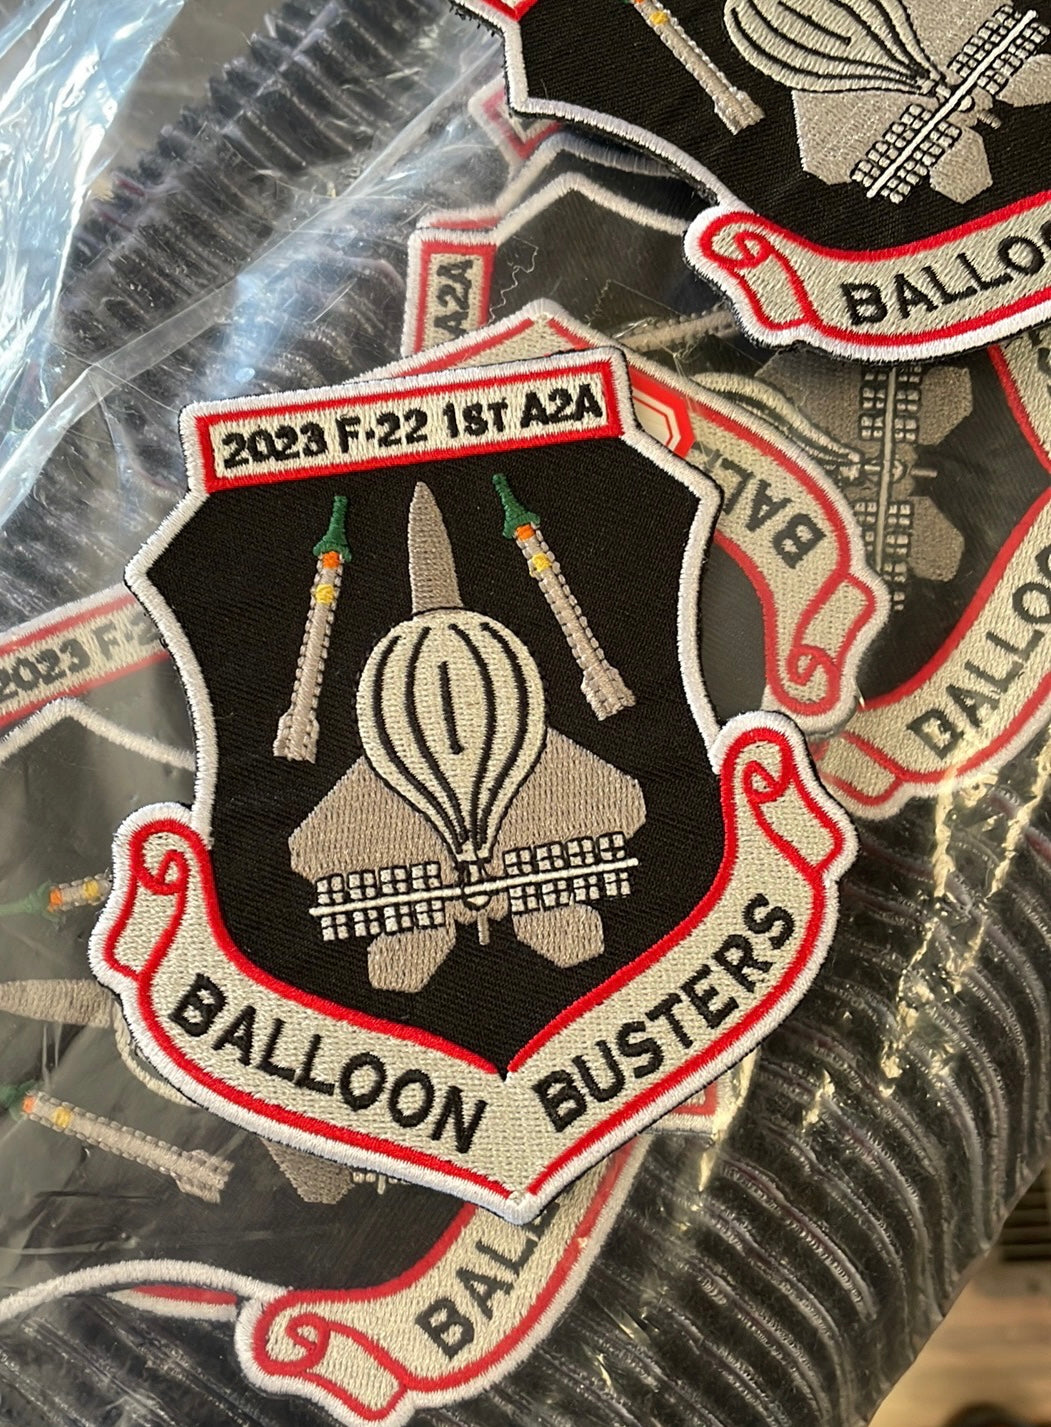 F22 Raptor “Balloon Busters” First Air-To-Air Kill Mission Patch Inspired Patch